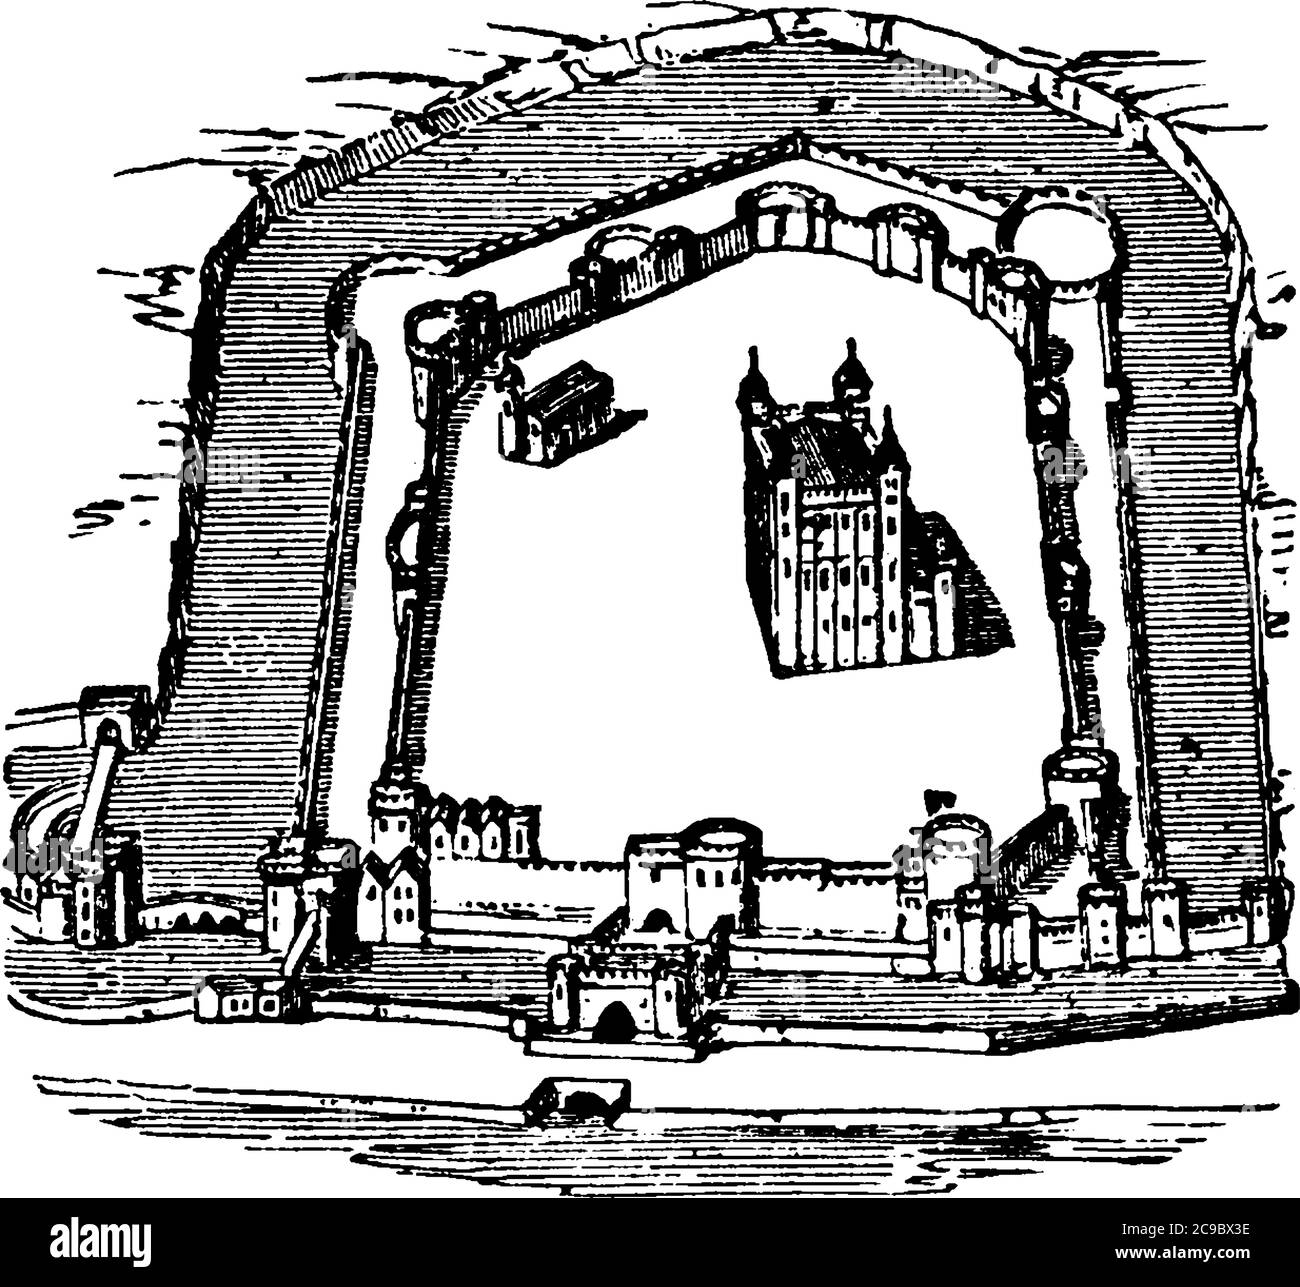 Schematic shows Tower of London, is a historic castle located on the north bank of the River Thames in central London, vintage line drawing or engravi Stock Vector